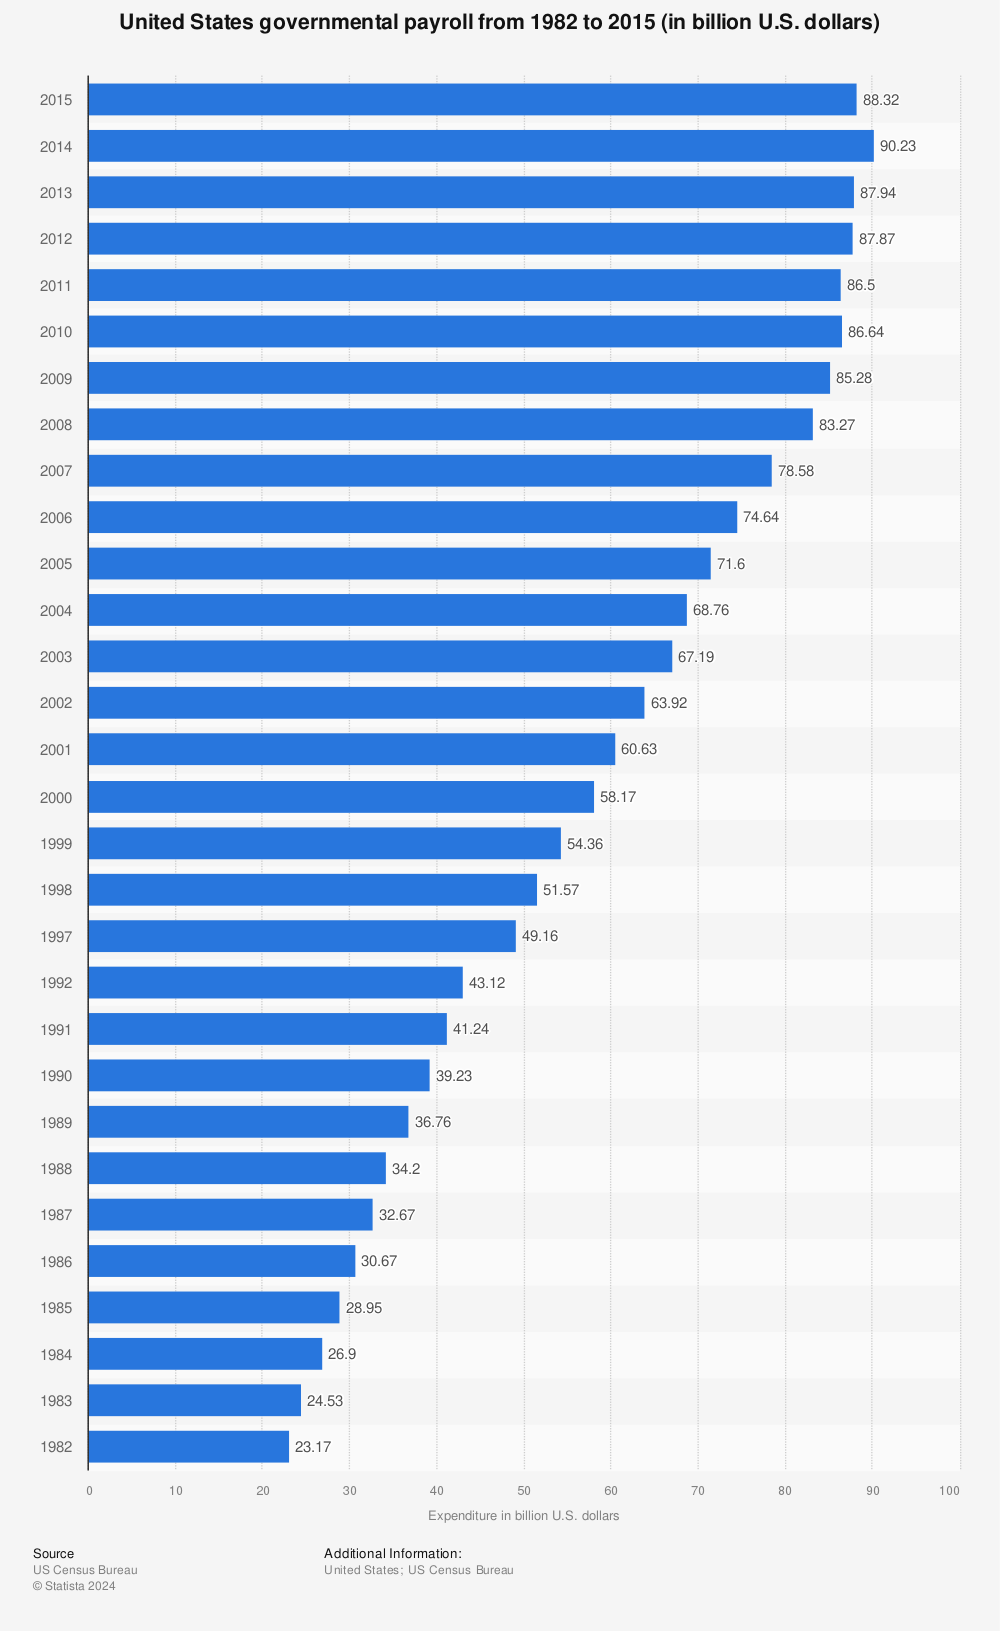 Statistic: United States governmental payroll from 1982 to 2015 (in billion U.S. dollars) | Statista